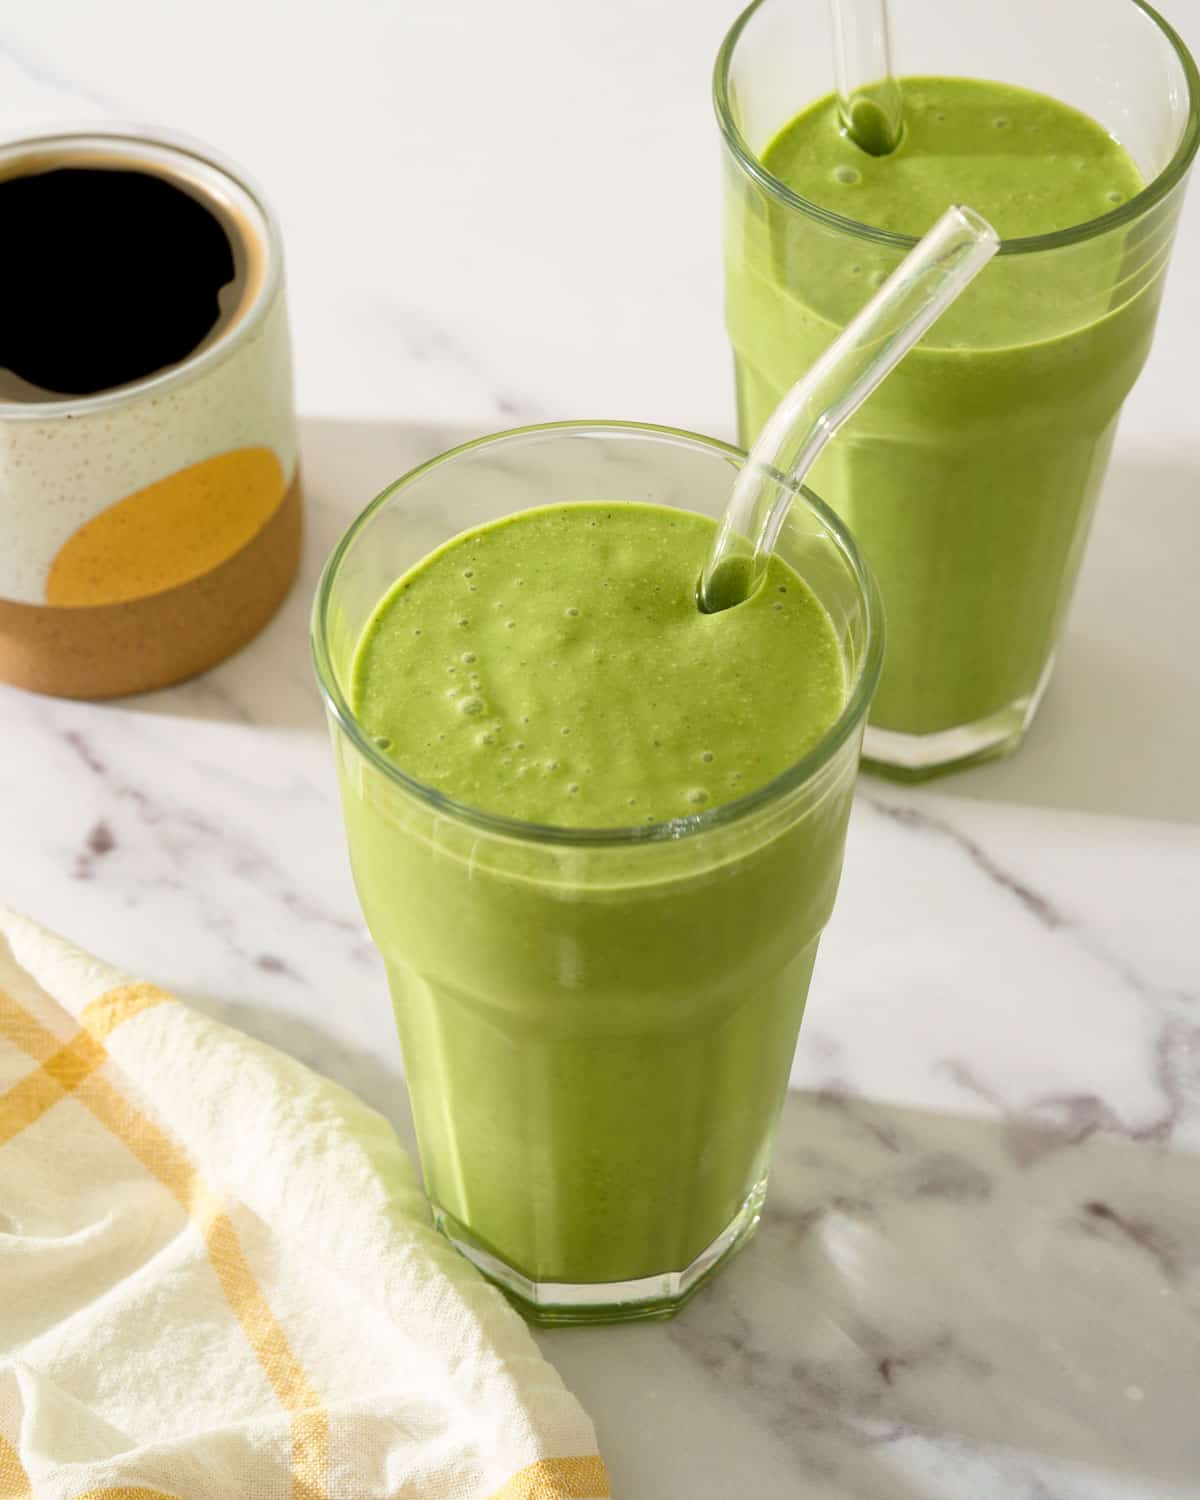 Two kale and spinach smoothies in glasses with straws.